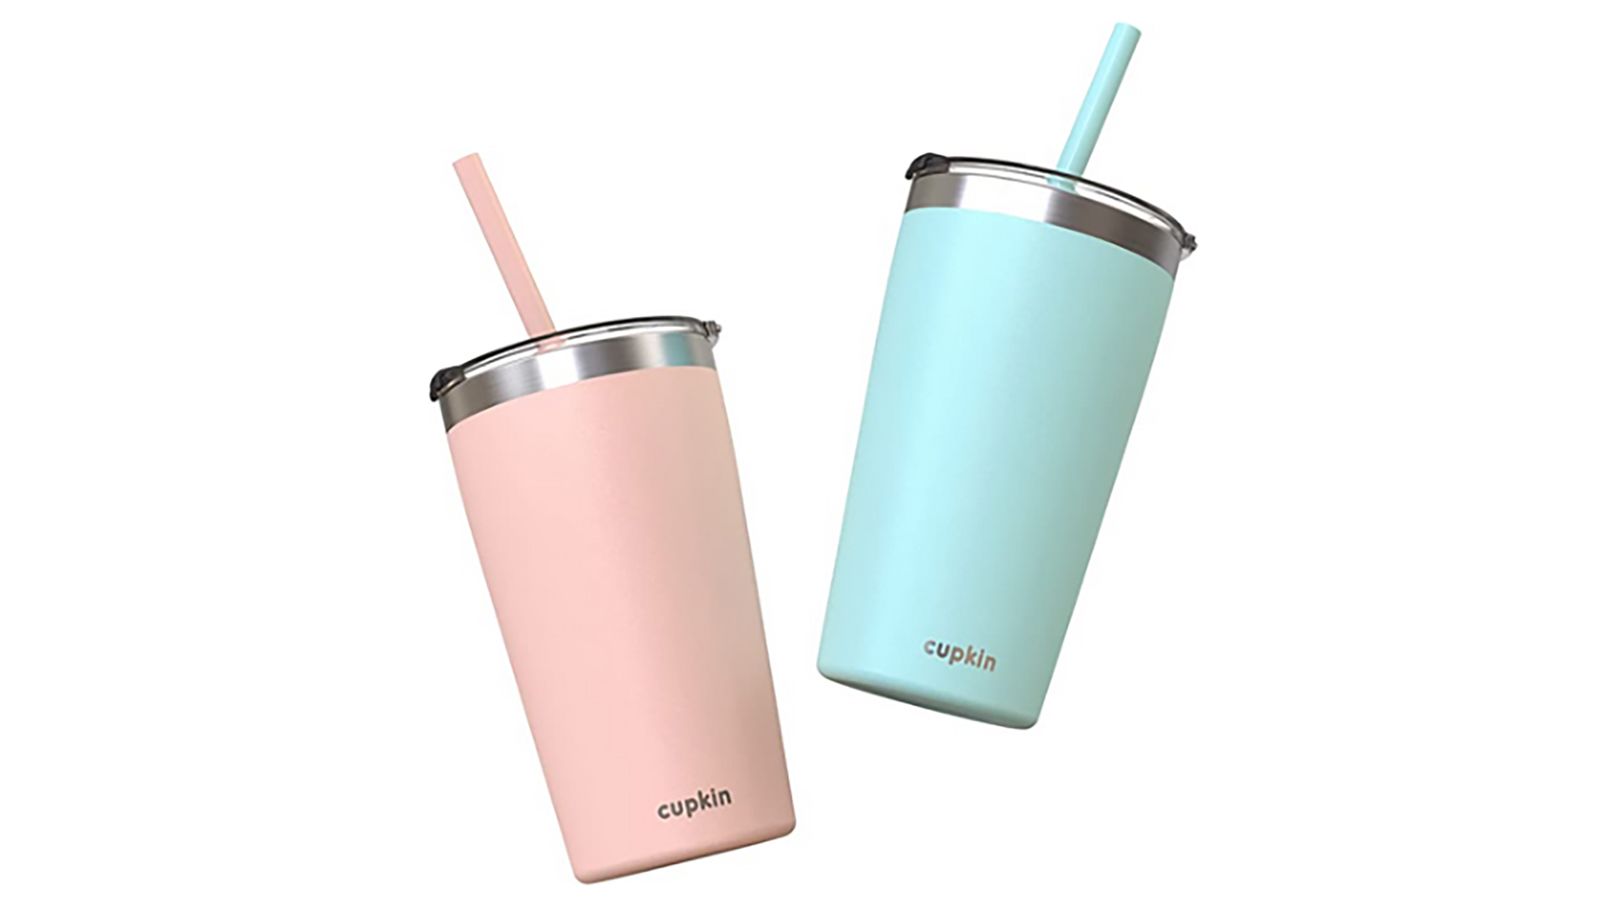 Kids Stainless Steel Smoothie Cup - Leak-Free - LUXEY CUP